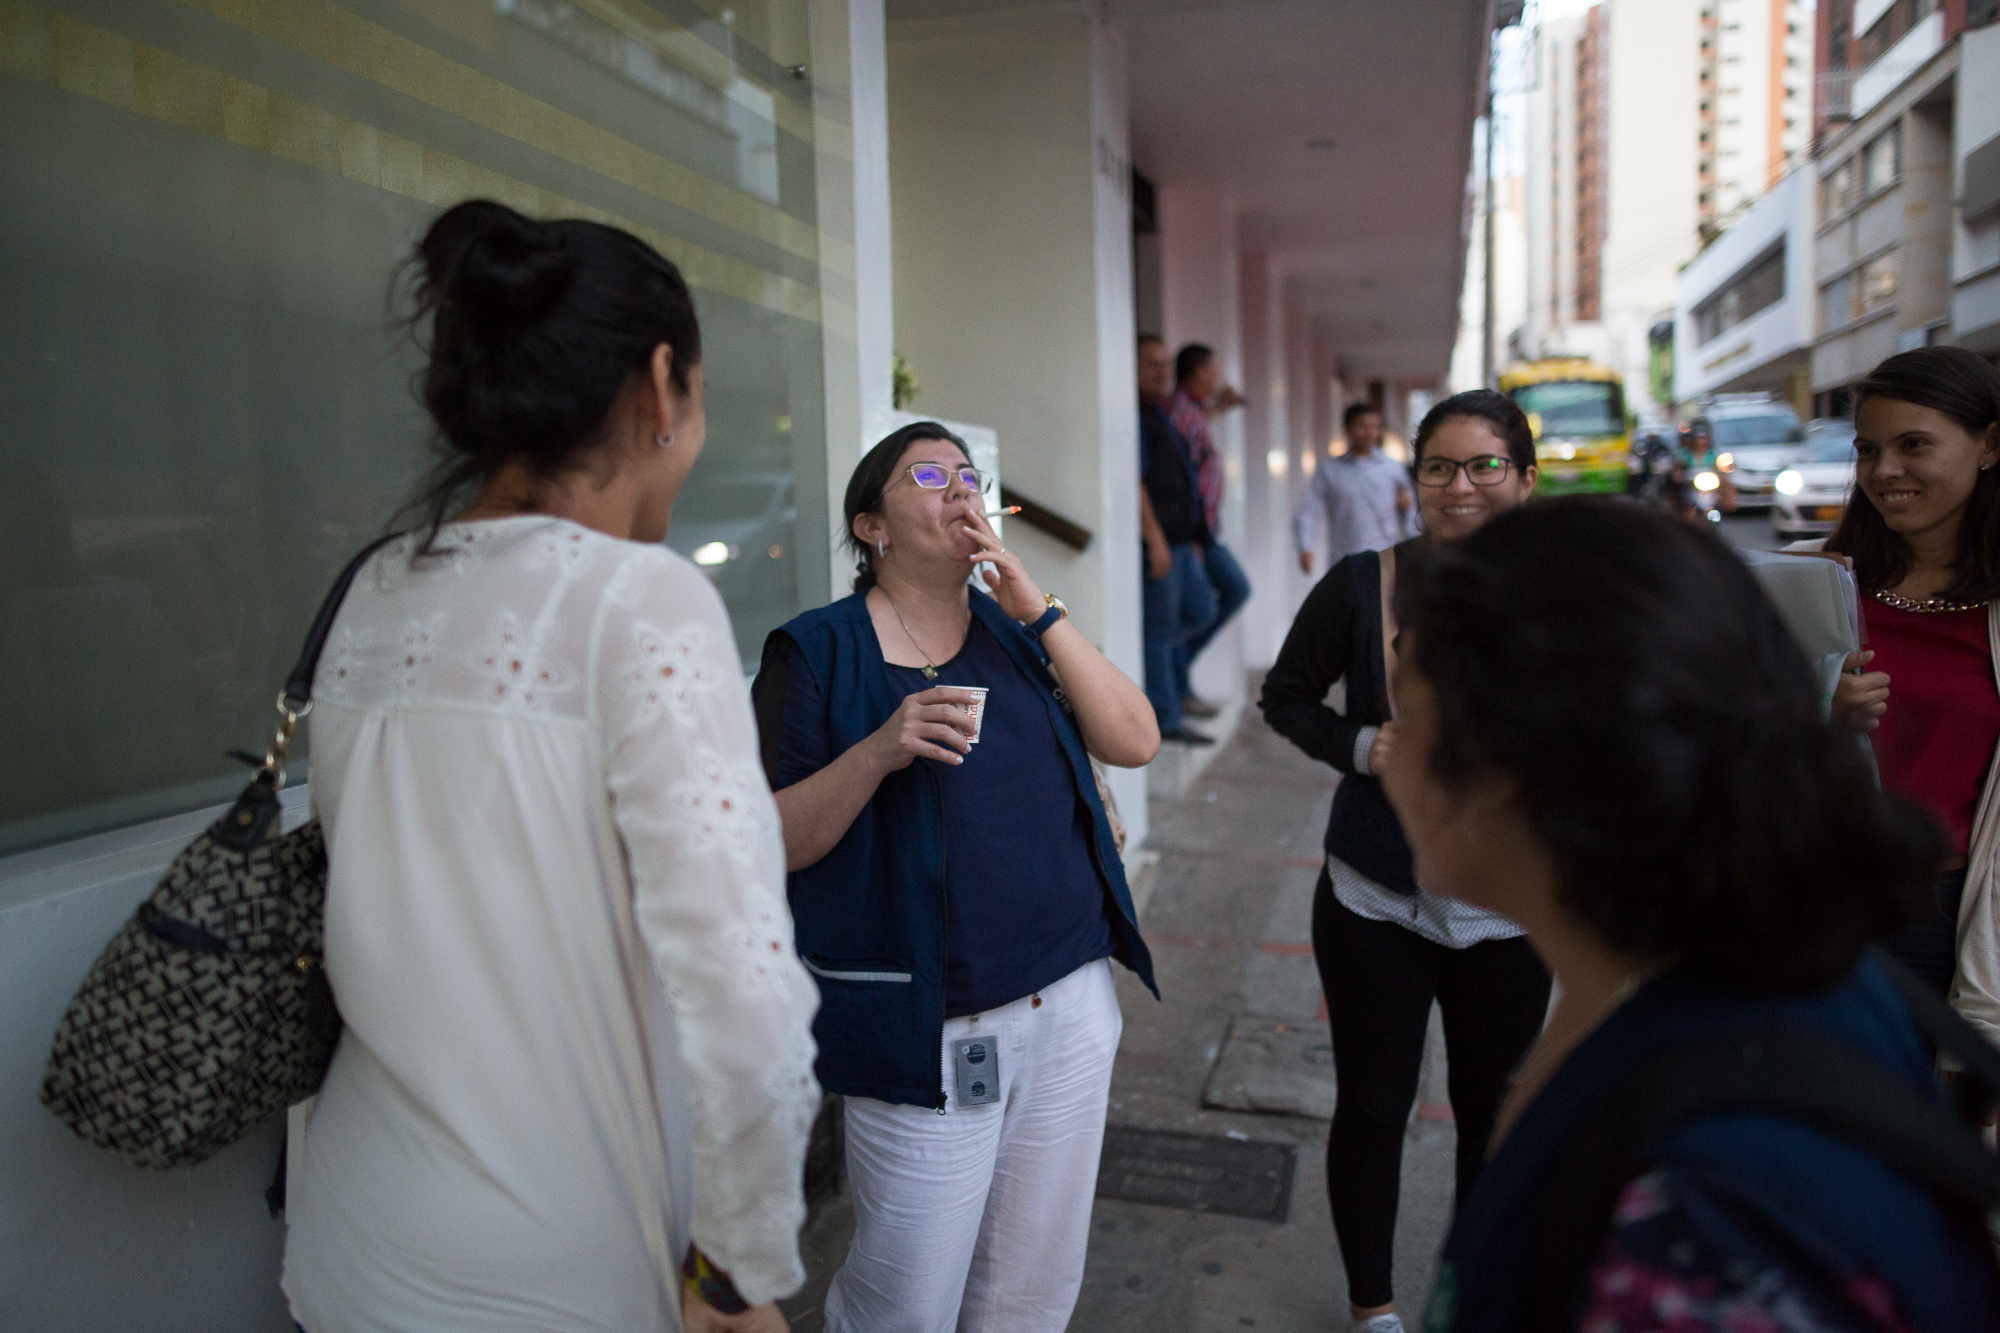  Julia Figueroa smokes a cigarette outside of a meeting while talking with her younger colleagues in Bucaramanga, Santander, Colombia.&nbsp;May 9, 2017. 